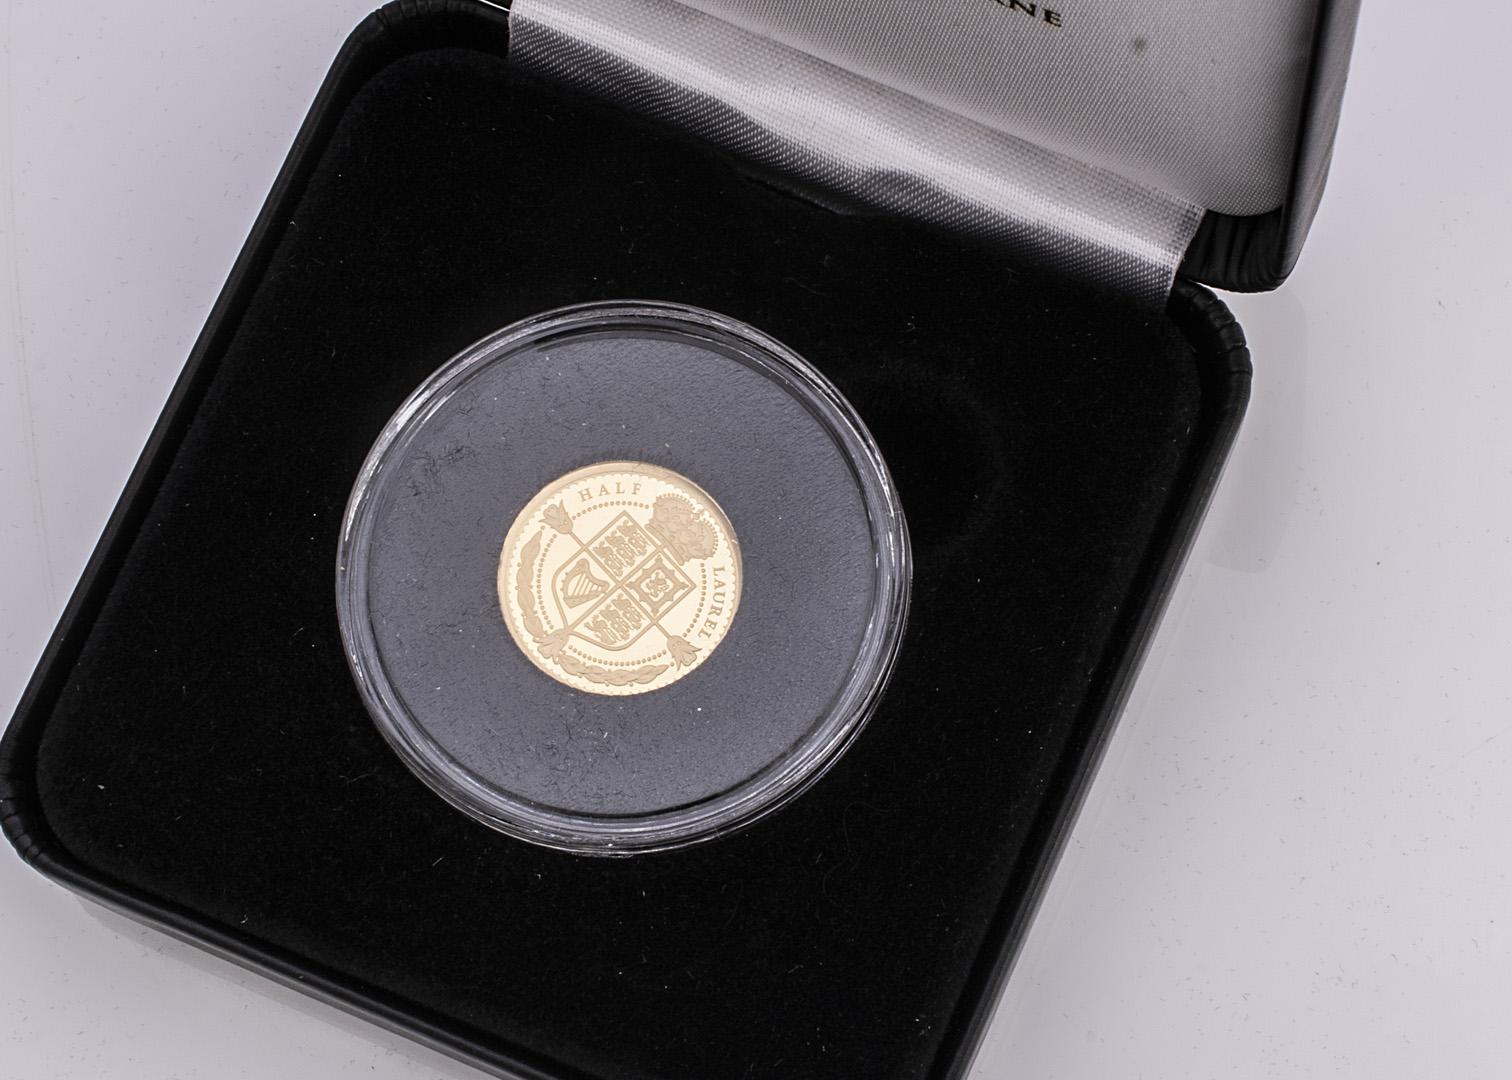 A Harrington & Byrne Tristan Da Cunha 2020 Half Laurel Gold Proof Coin, 4g, box with certificate - Image 2 of 2